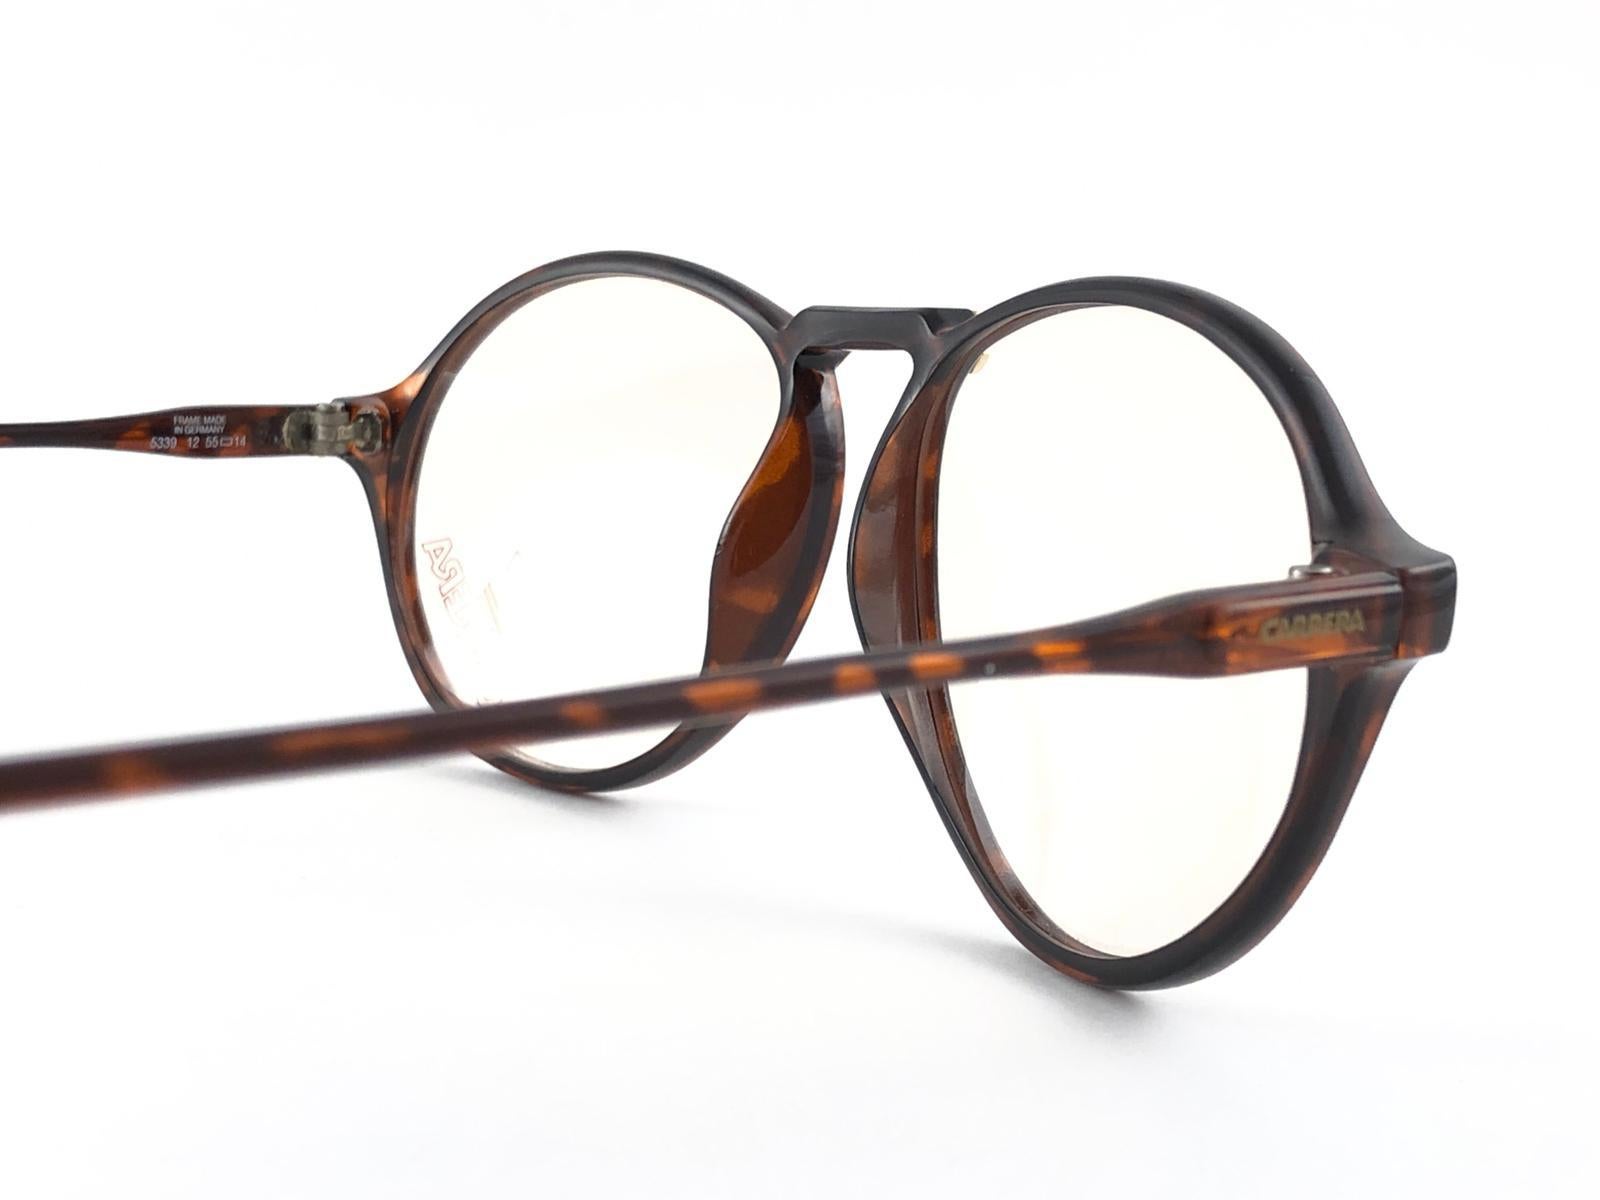 New Vintage Carrera 5339 Tortoise Round Glasses RX Reading Austria In New Condition For Sale In Baleares, Baleares